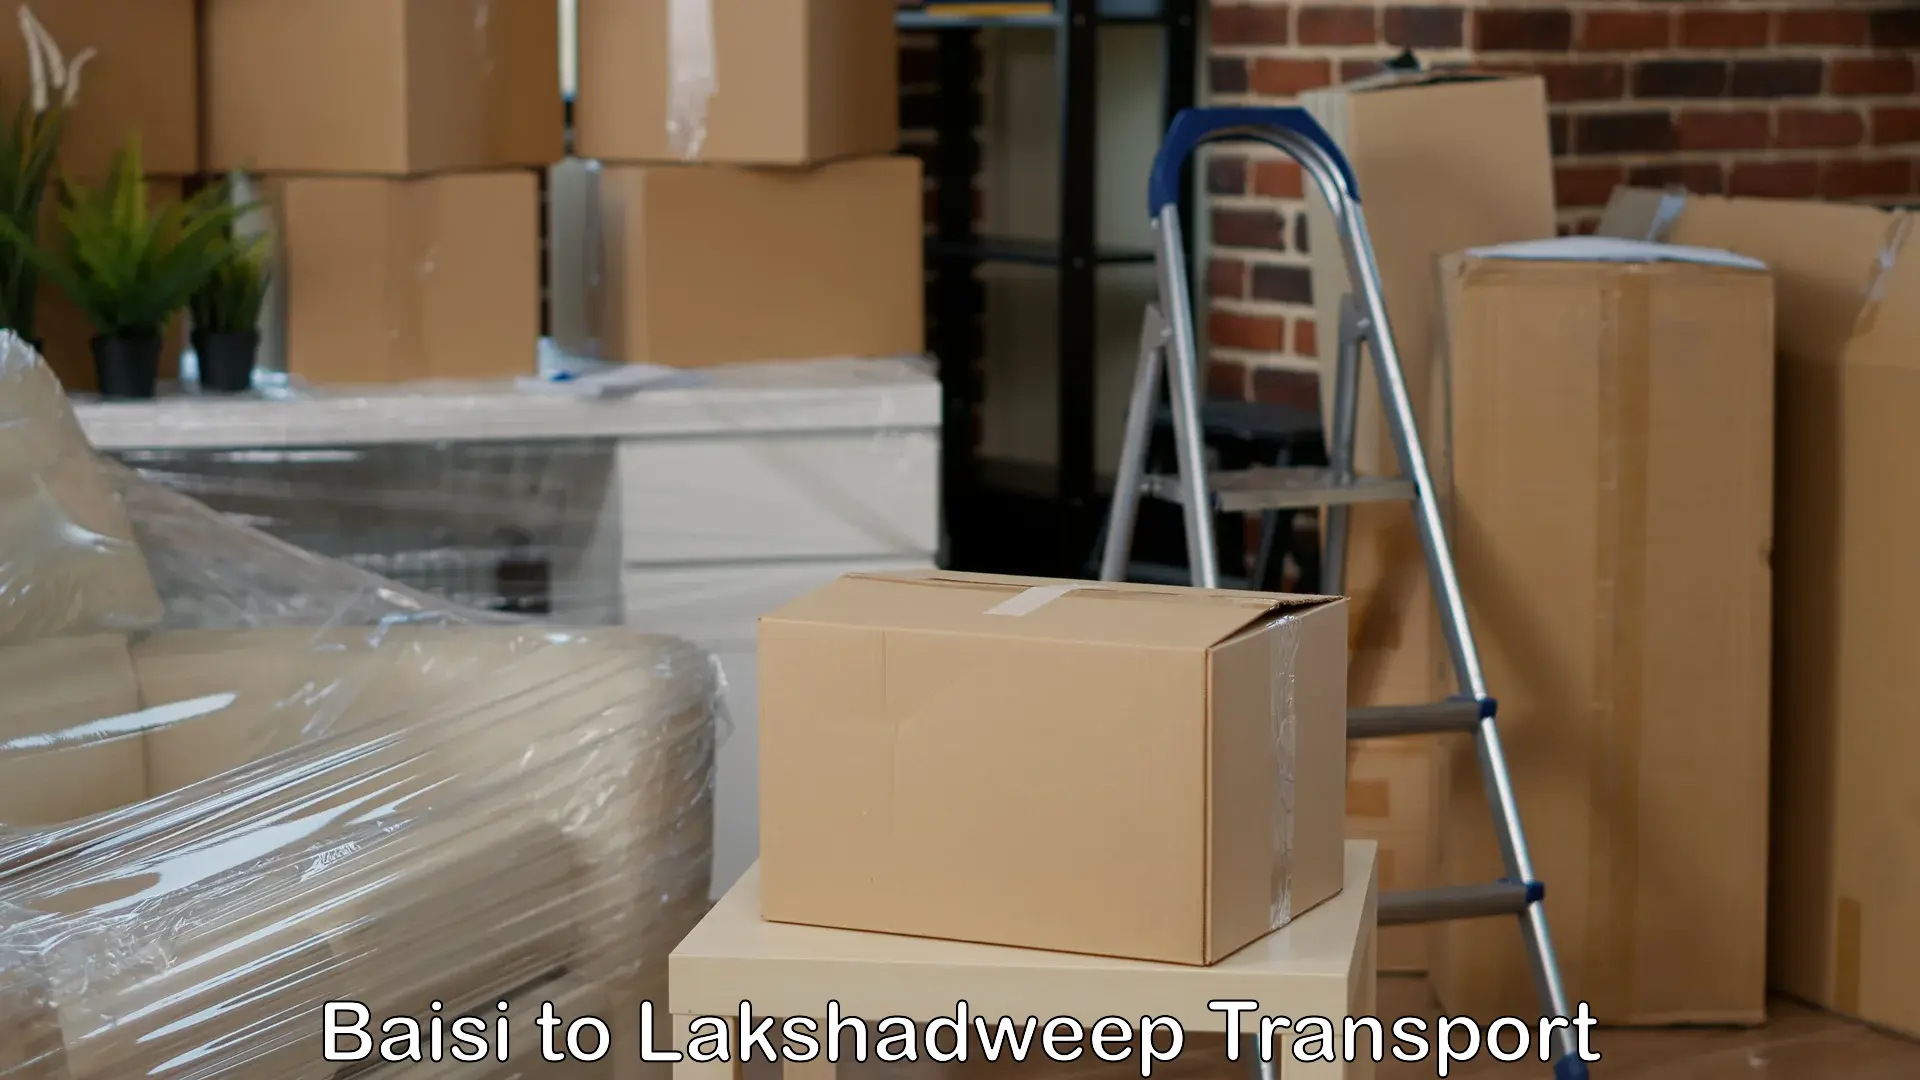 Container transport service Baisi to Lakshadweep